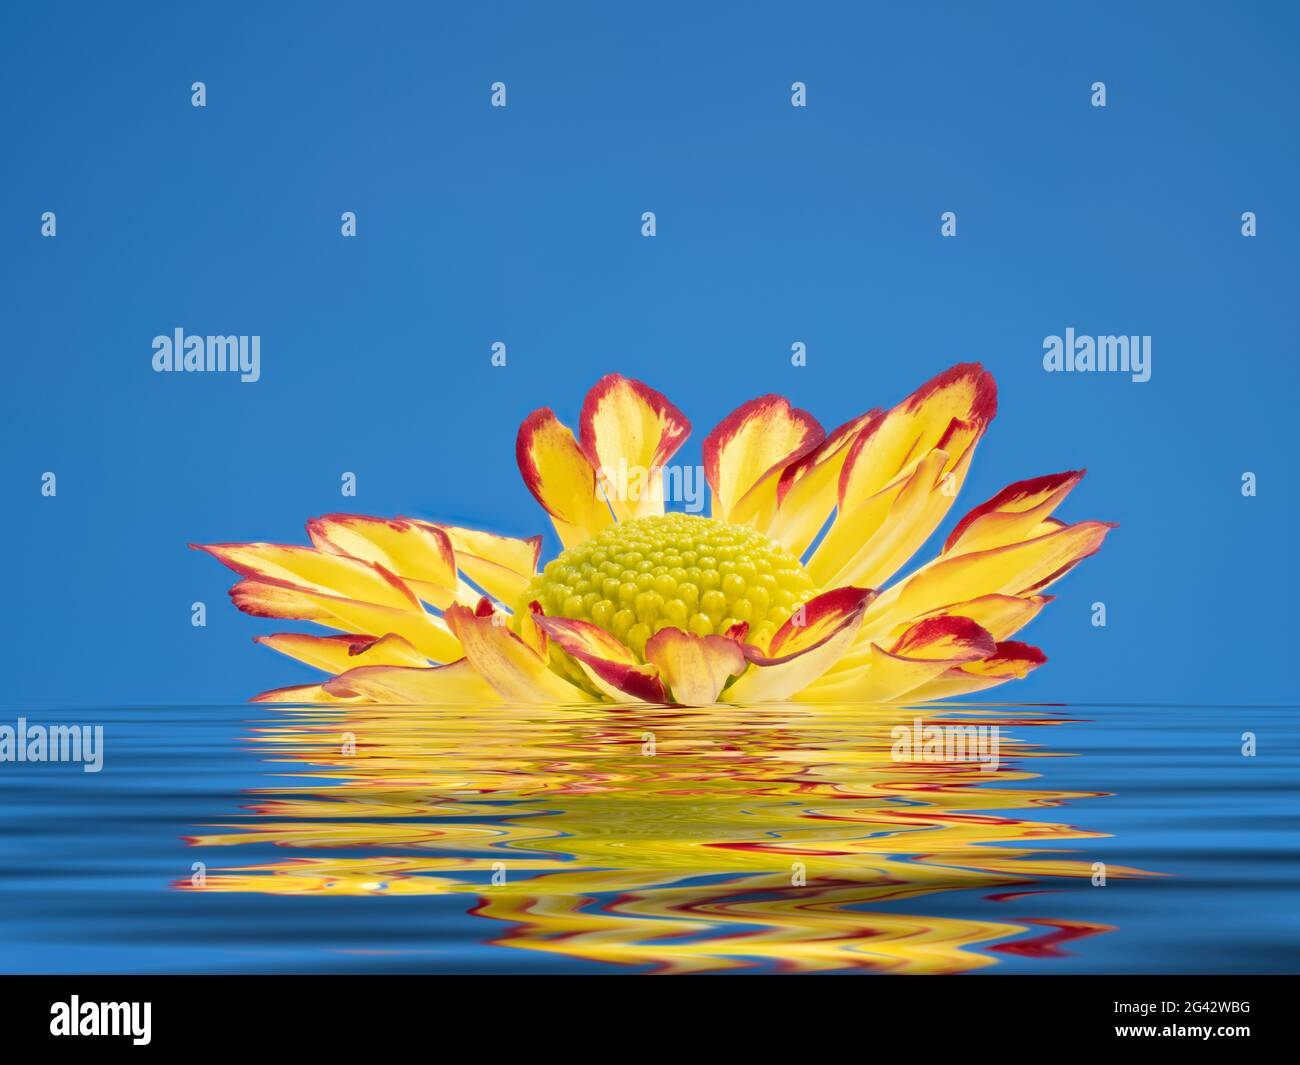 Chrysanthemum floating on the water Stock Photo